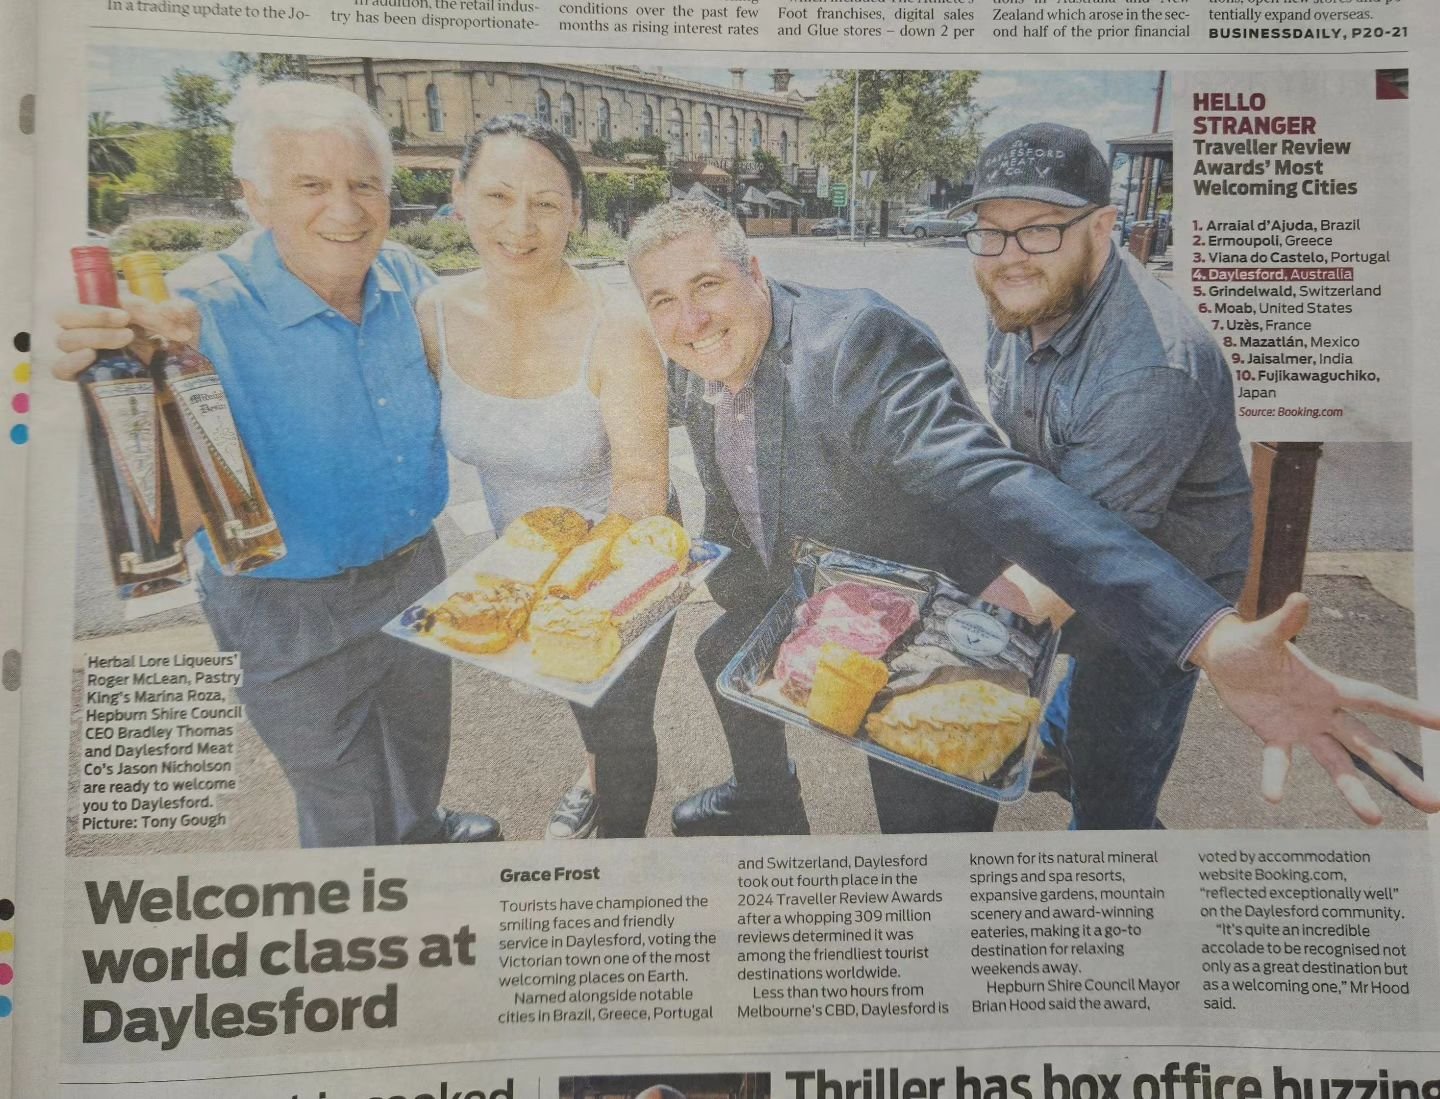 #Daylesford makes the cut for the worlds most welcoming cities, any wonder with friendly faces like butcher Jason at your service!